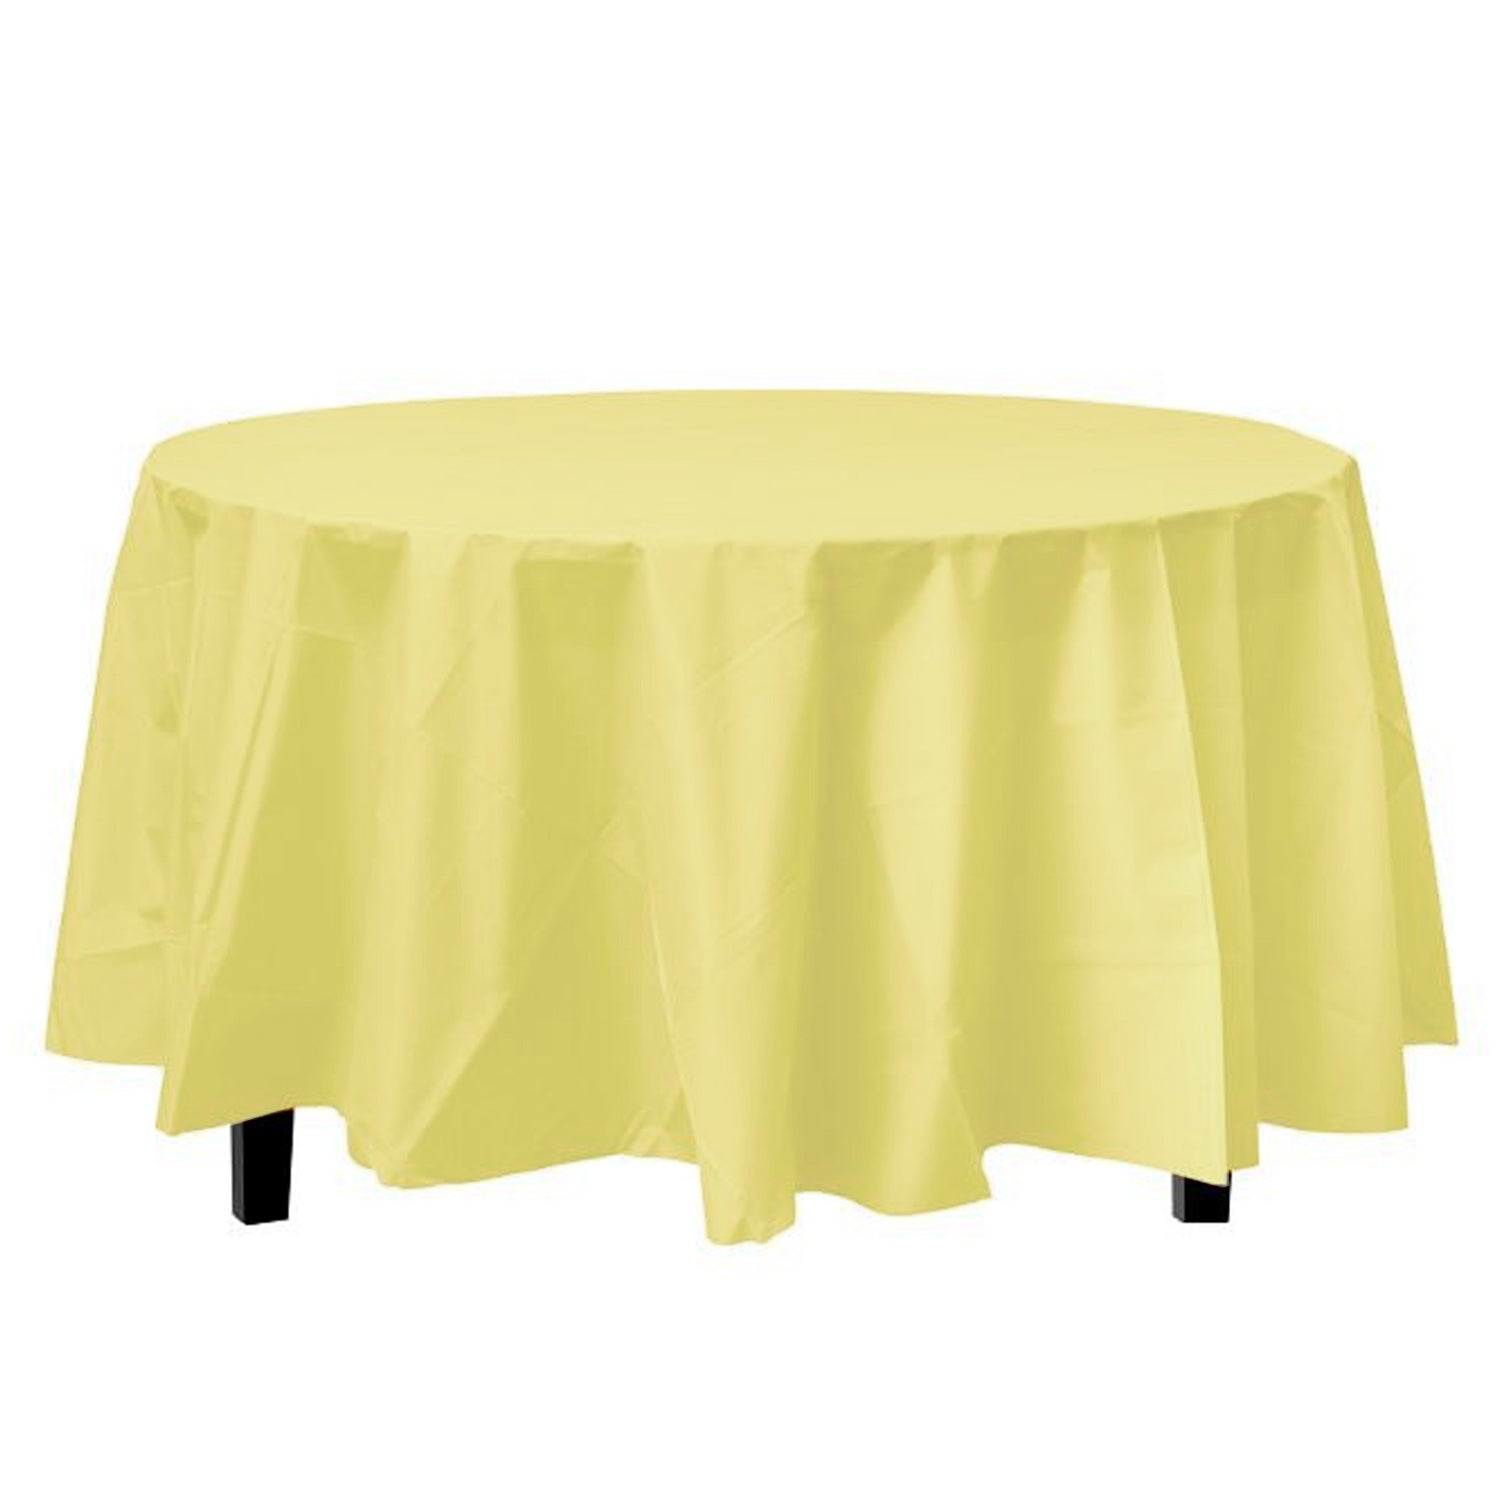 TableCloth Plastic Disposable Round Yellow 84'' Tablesettings Party Dimensions   